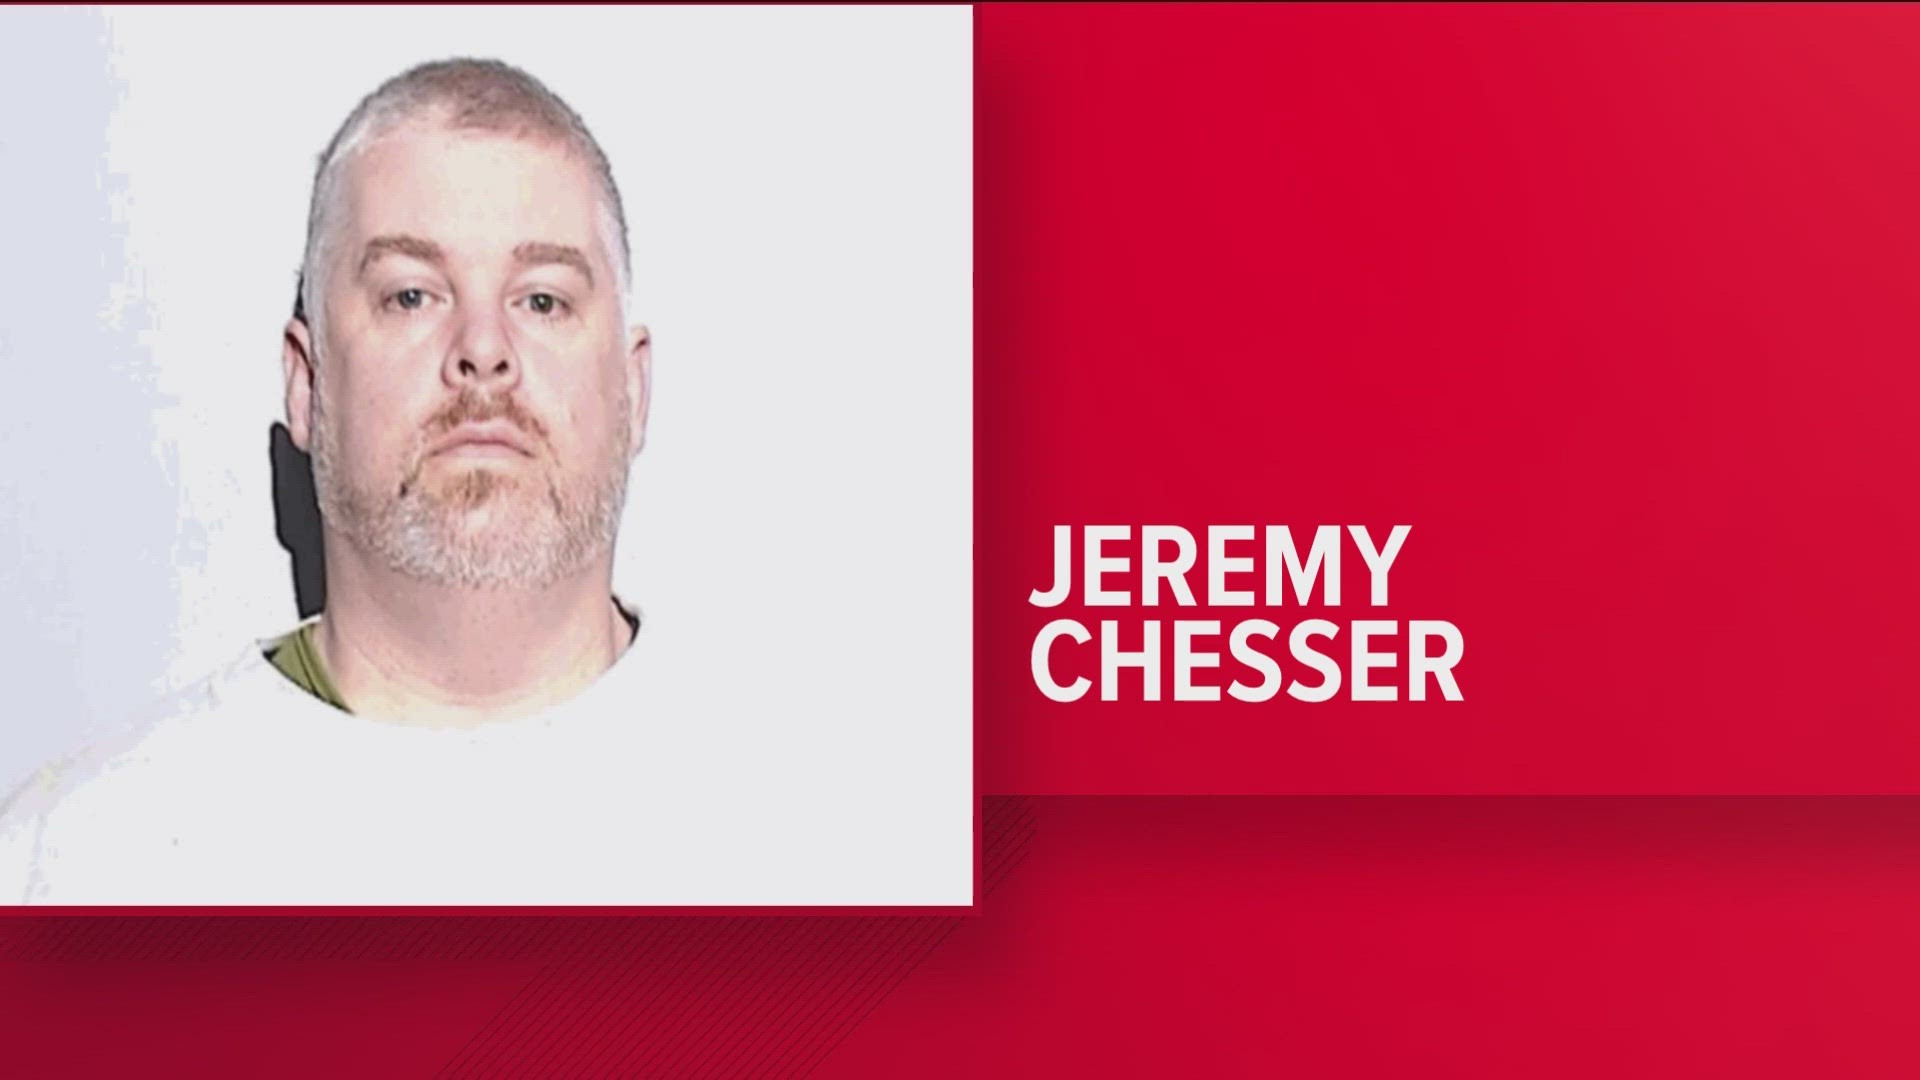 Jeremy Chesser was charged with multiple sex crimes against children in August 2023. In addition to 3 federal charges, 19 additional counts were filed in December.